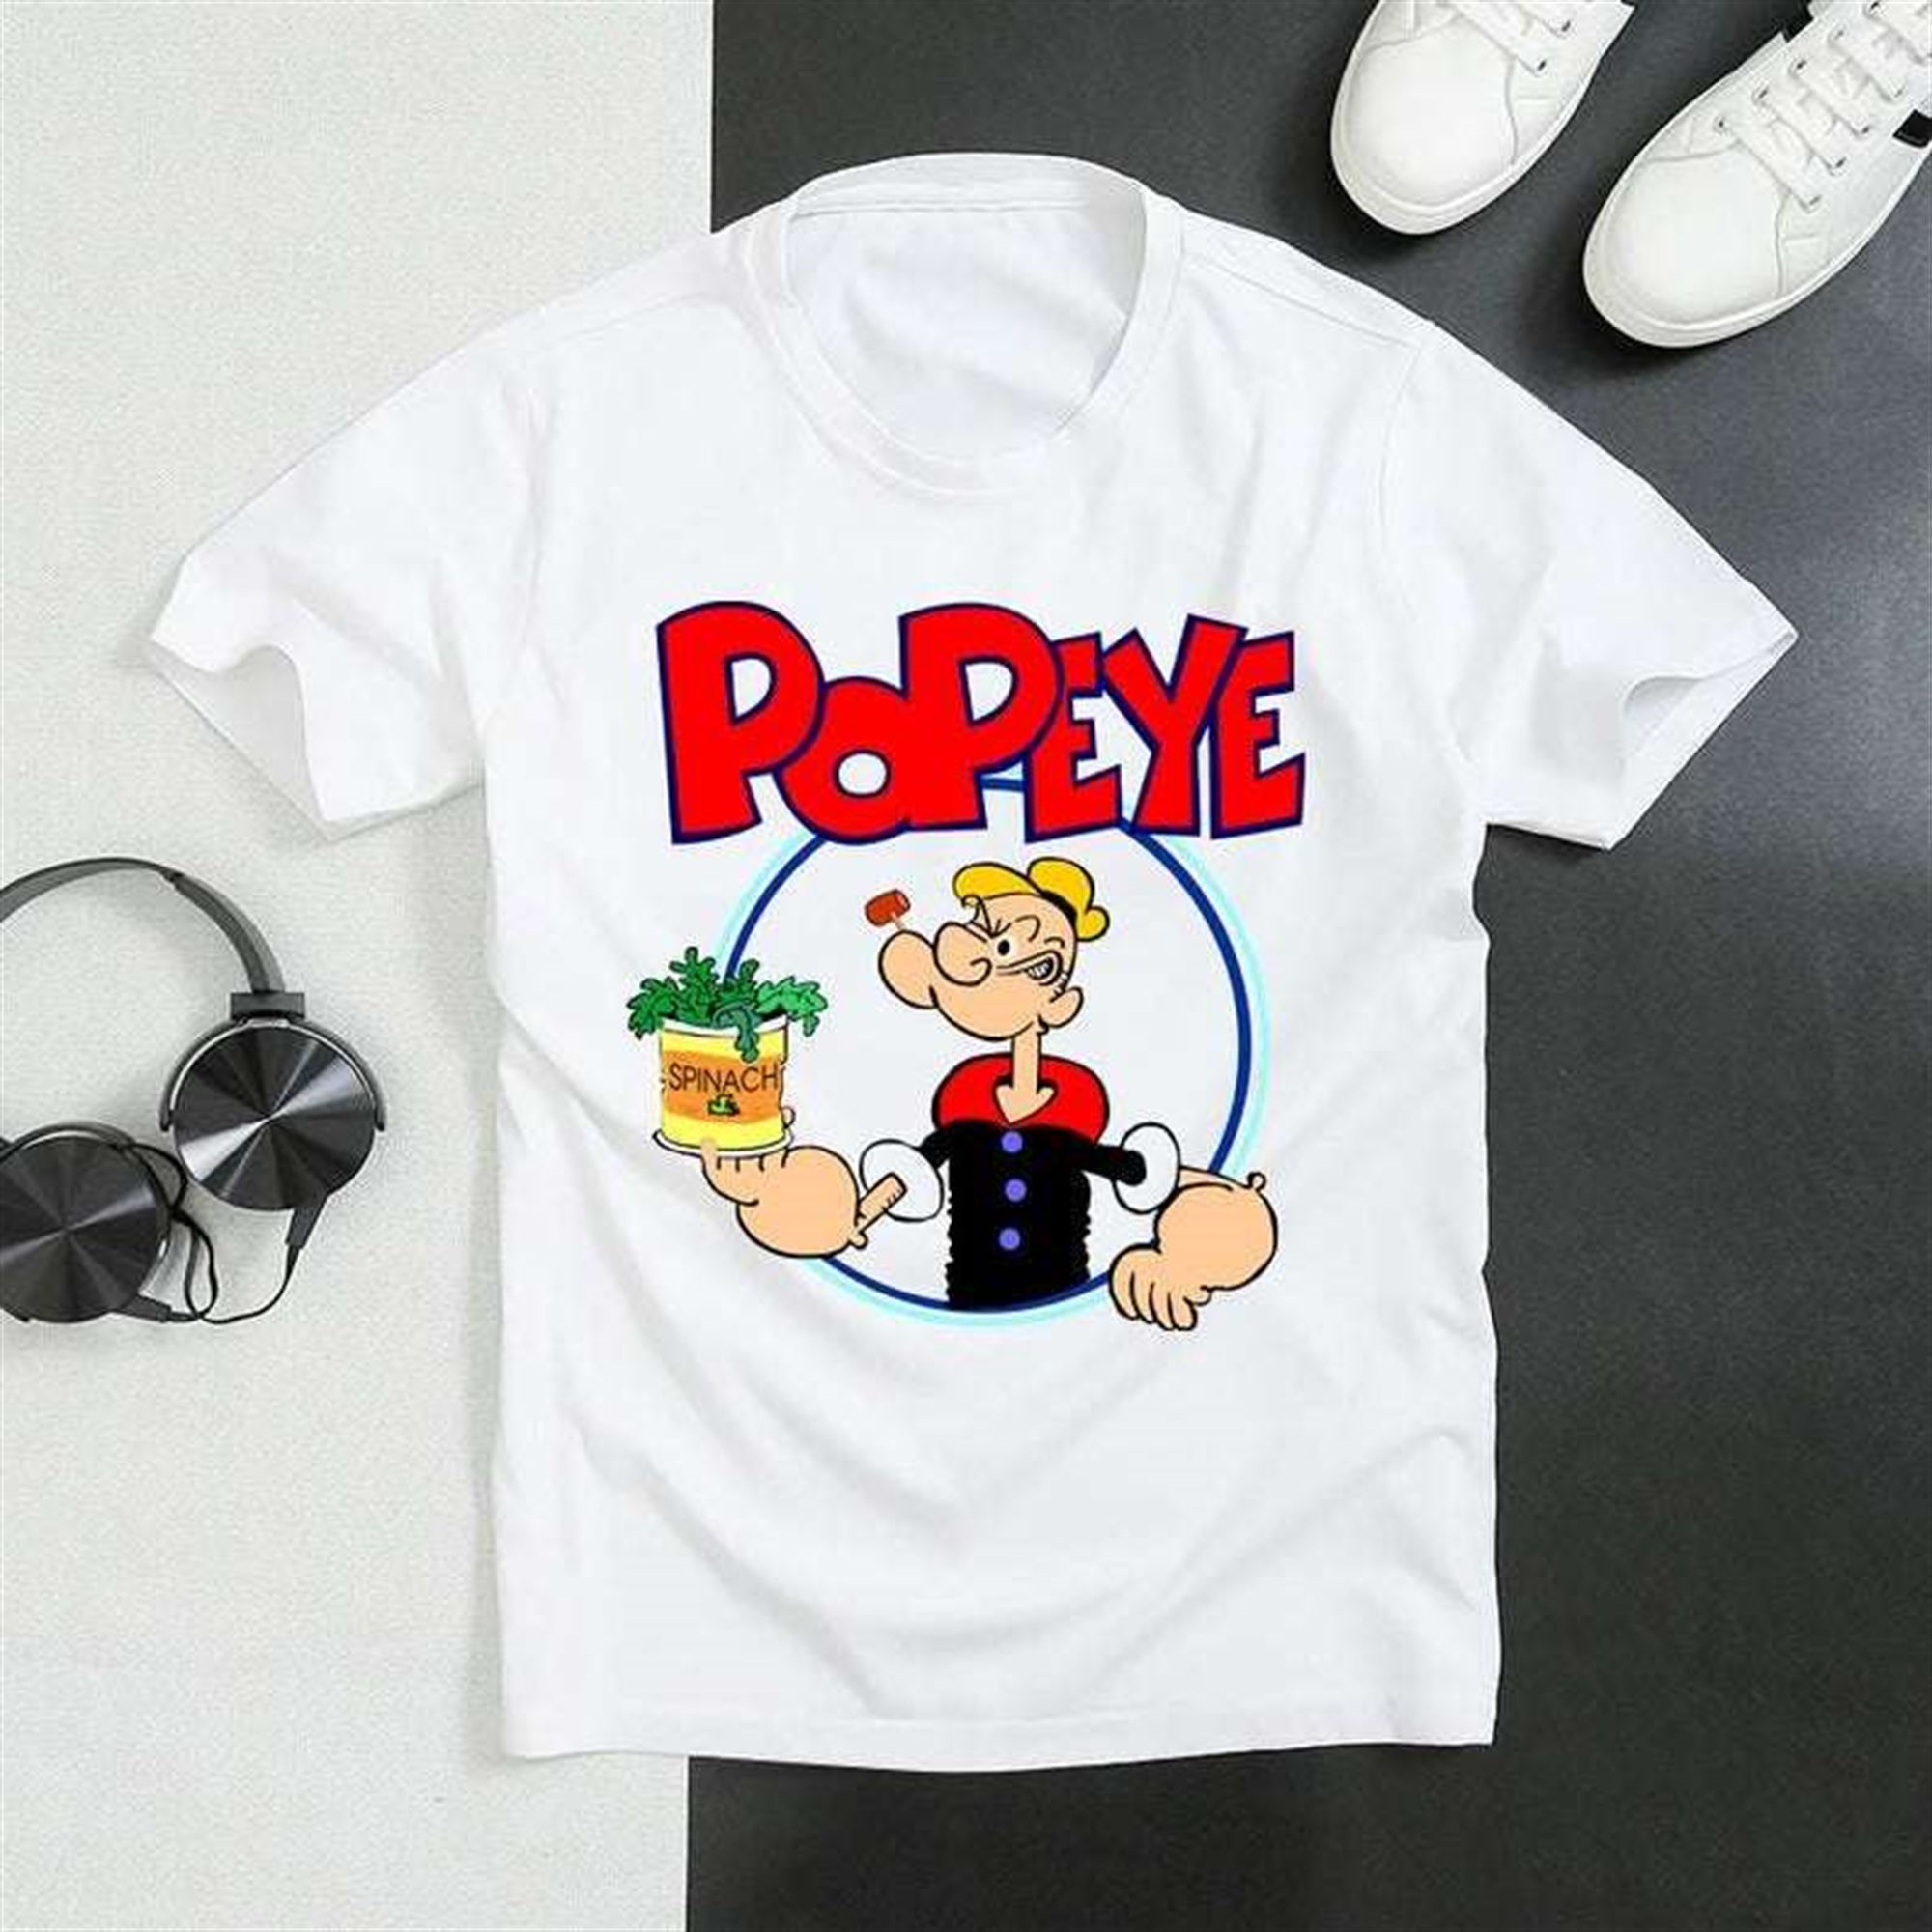 Eating Healthy Spinach Popeye T Shirt Size Up To 5xl